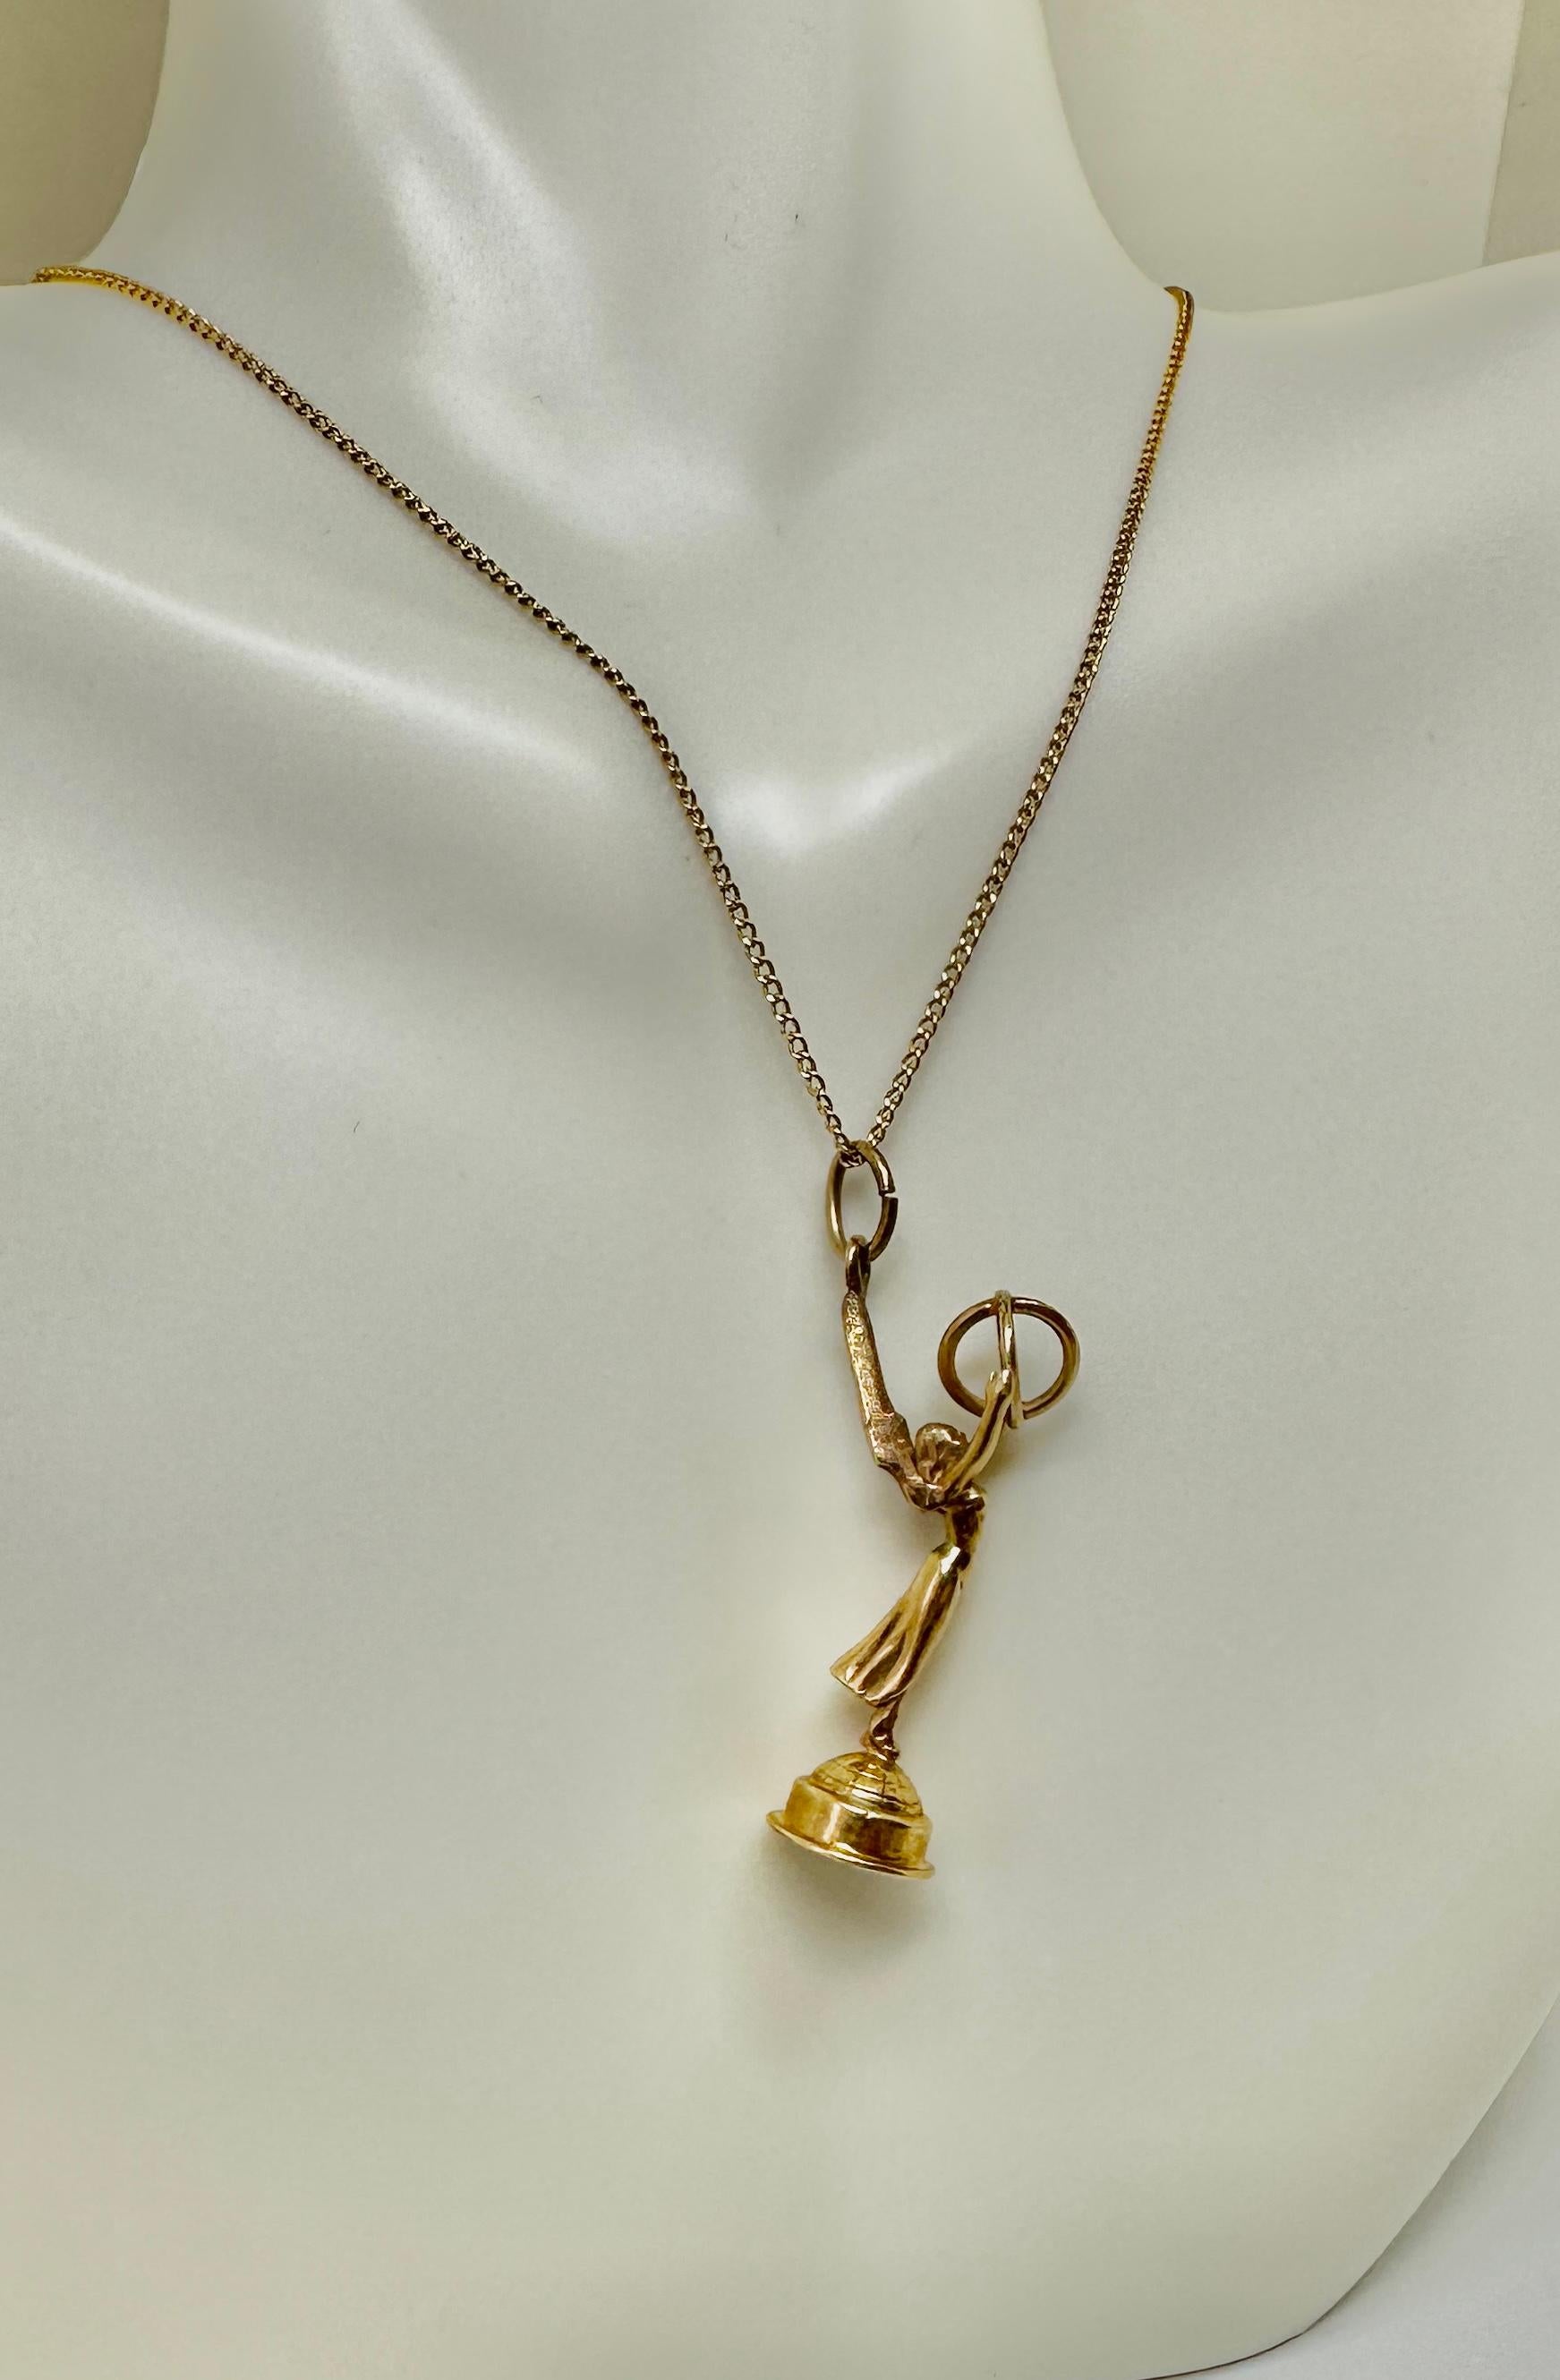 This is a very rare antique Emmy Award Pendant from the estate of Hollywood Legend Norman Lloyd in 14 Karat Yellow Gold.  What a treasure for lover's of Hollywood, Television, Entertainment, Actors, Writers, Producers or any of the brilliant artists